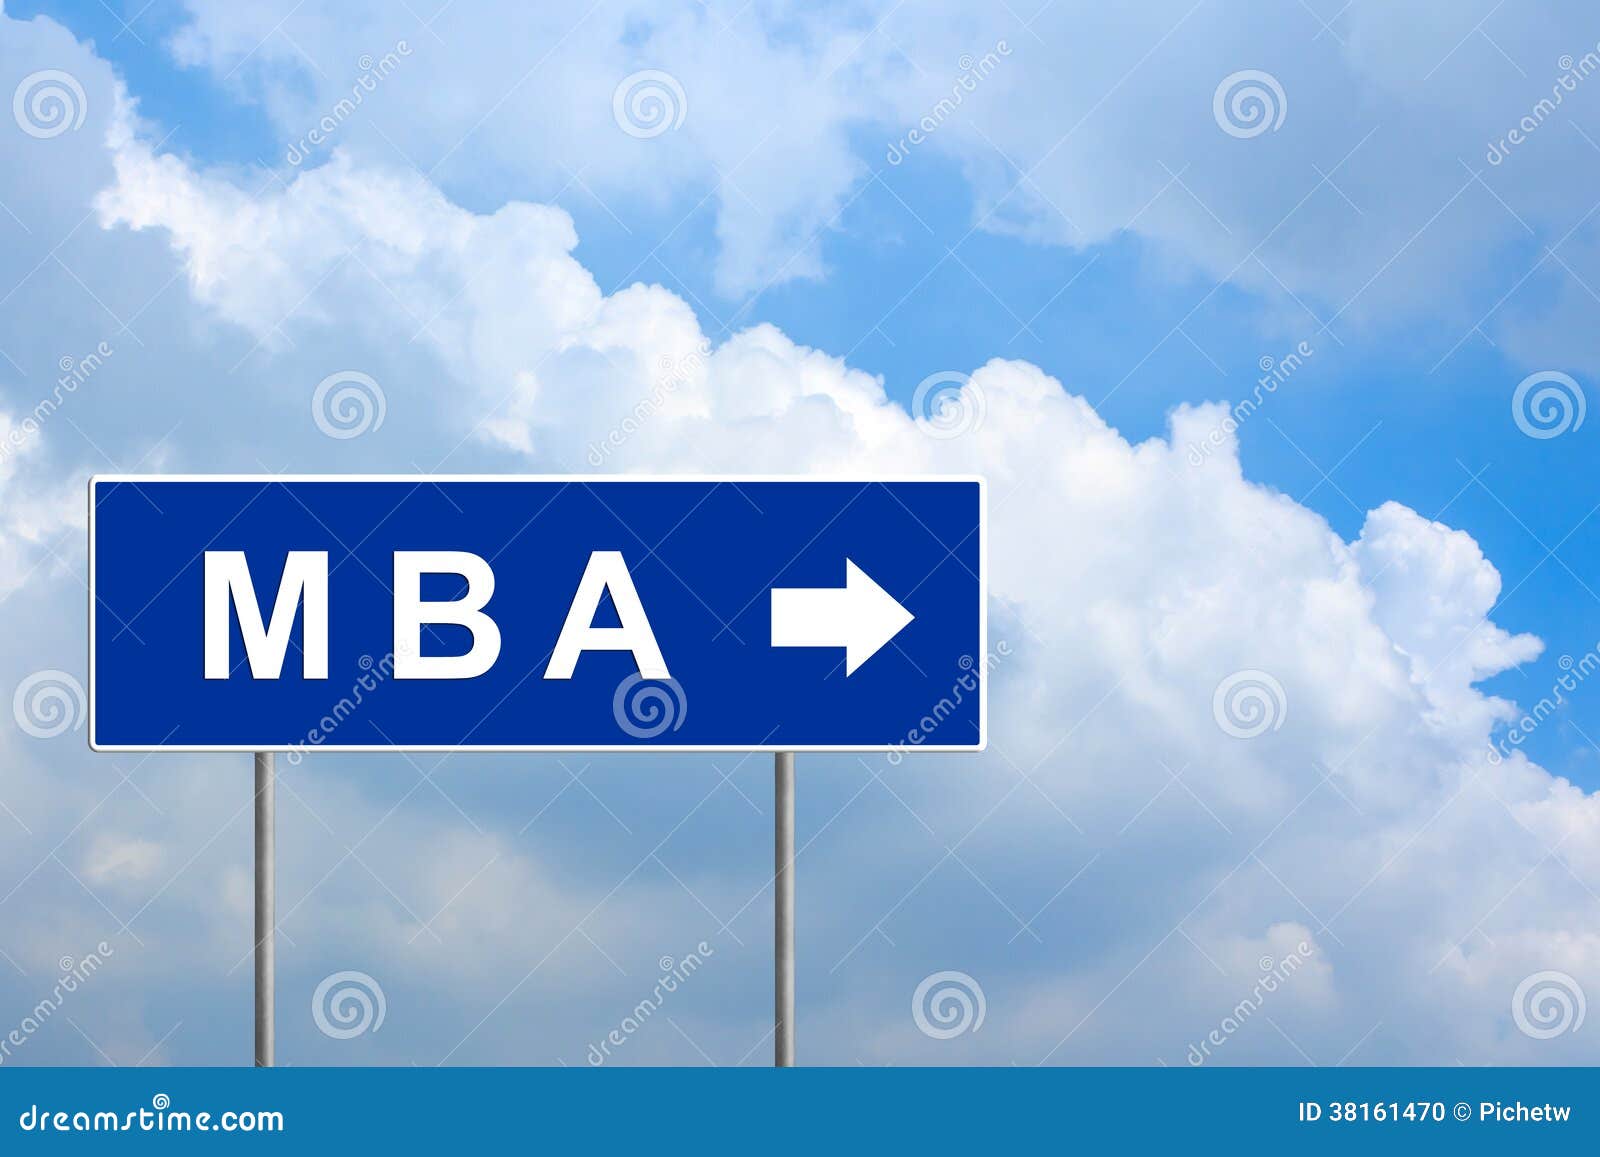 mba or master of business administration on blue road sign